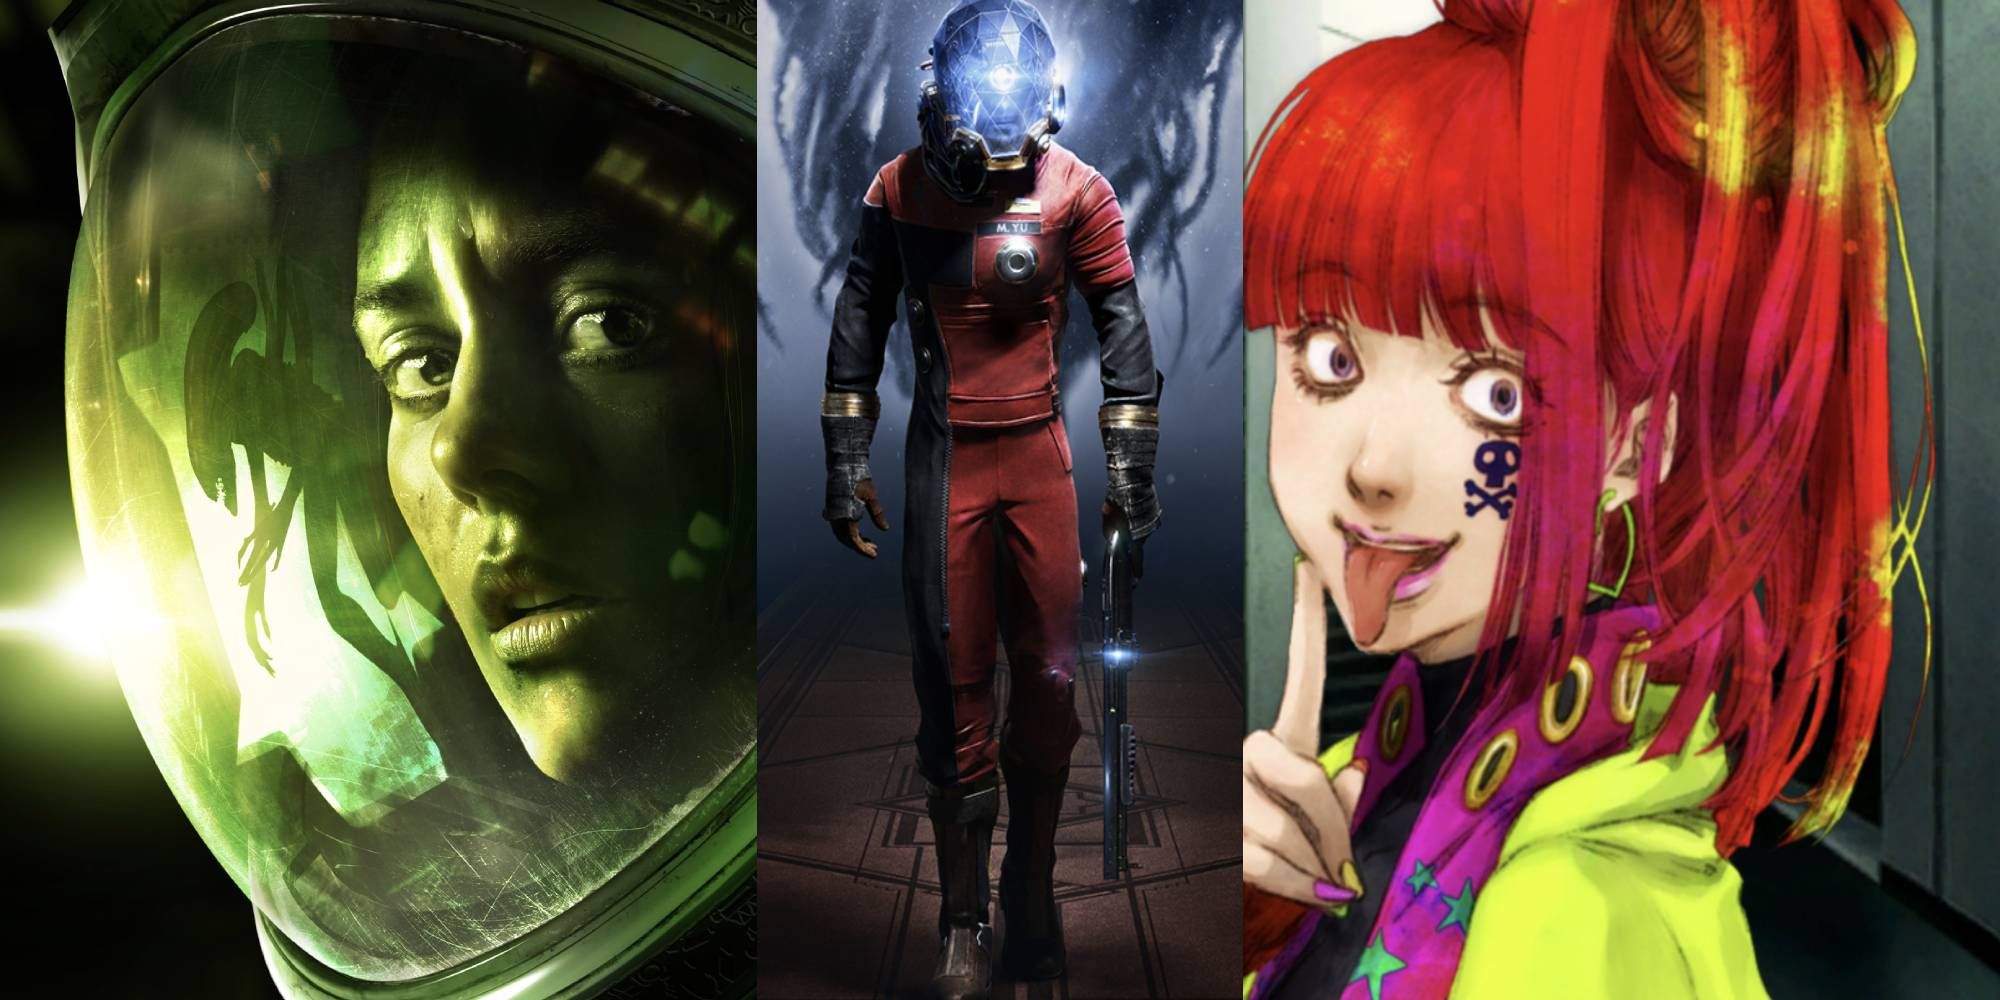 Split image of space horror game characters